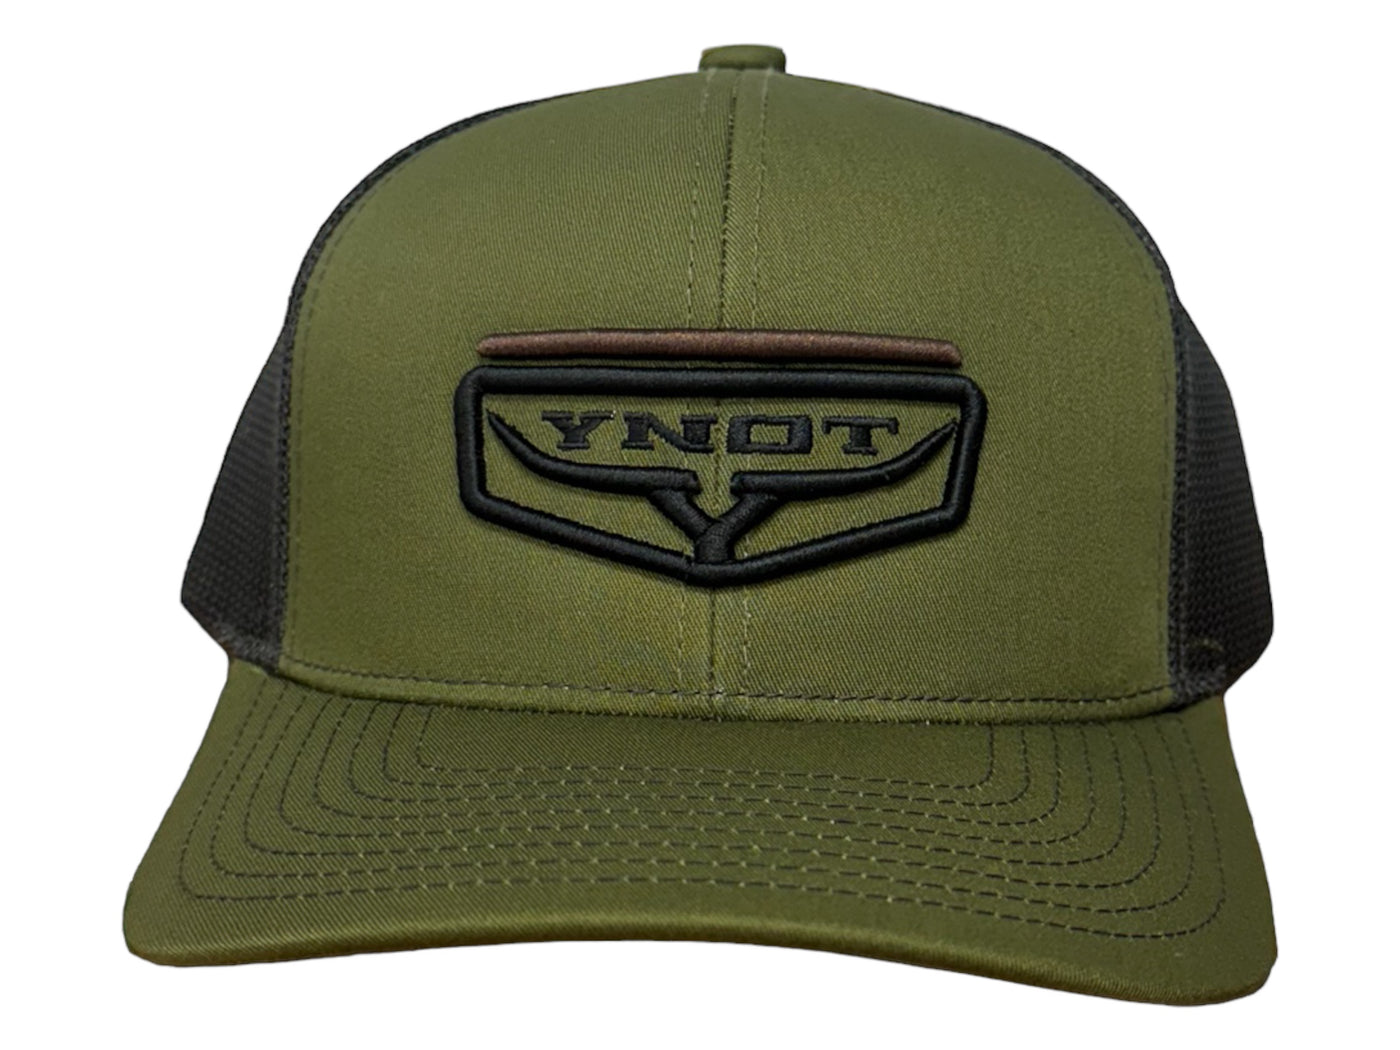 YNOT Lifestyle Brand Hat and Apparel - Western Wear - Quality Farmer & Rancher Hats